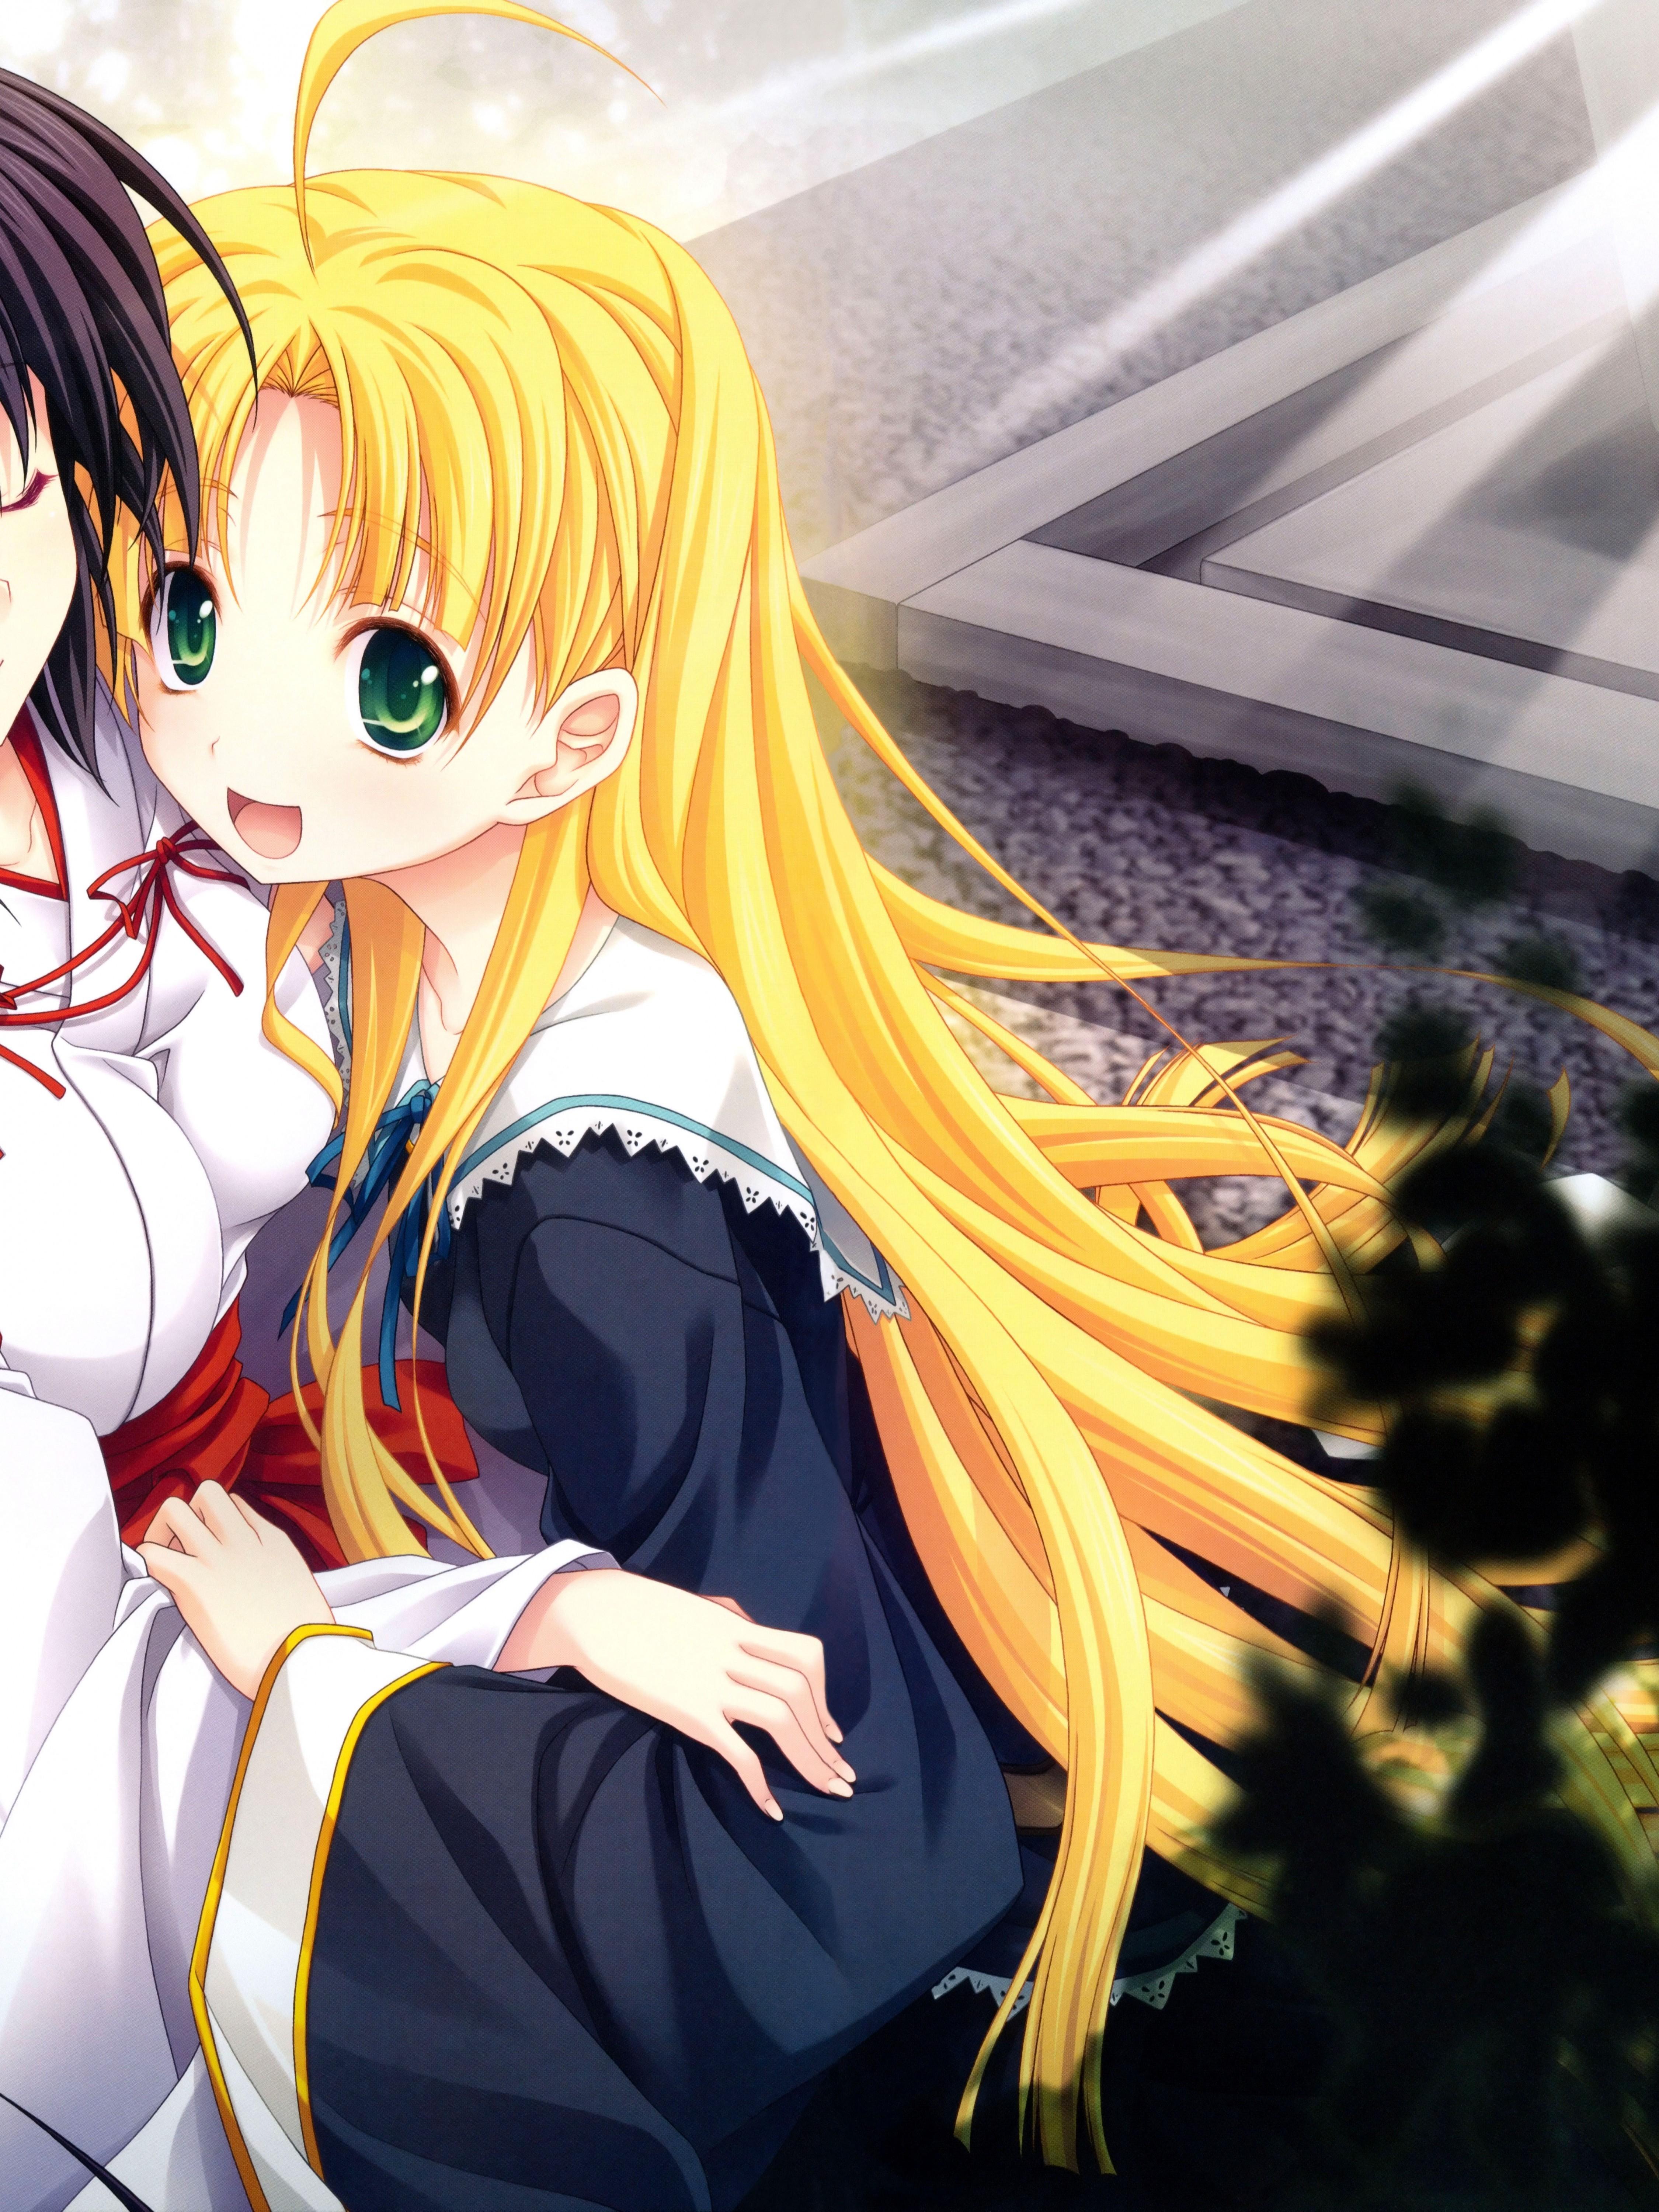 High School DxD Licensed by FUNimation | The G.A.M.E.S. Blog